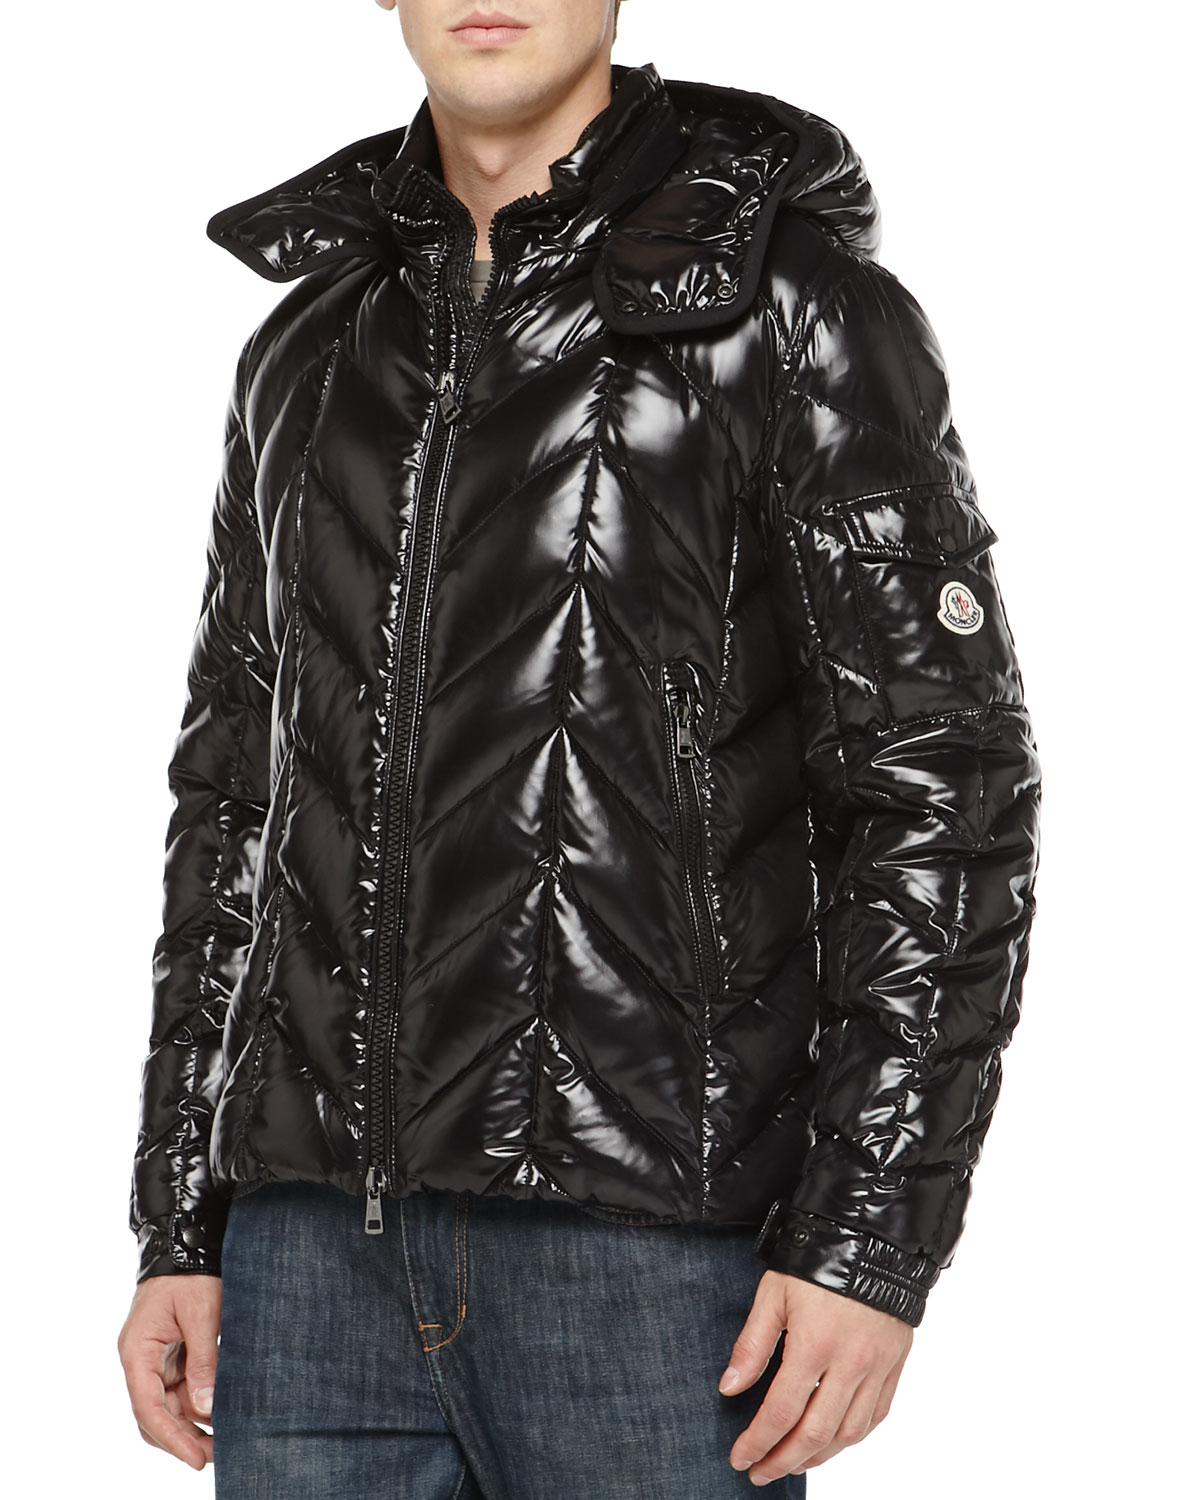 Lyst - Moncler Berriat Chevron-quilted Hooded Jacket in Black for Men